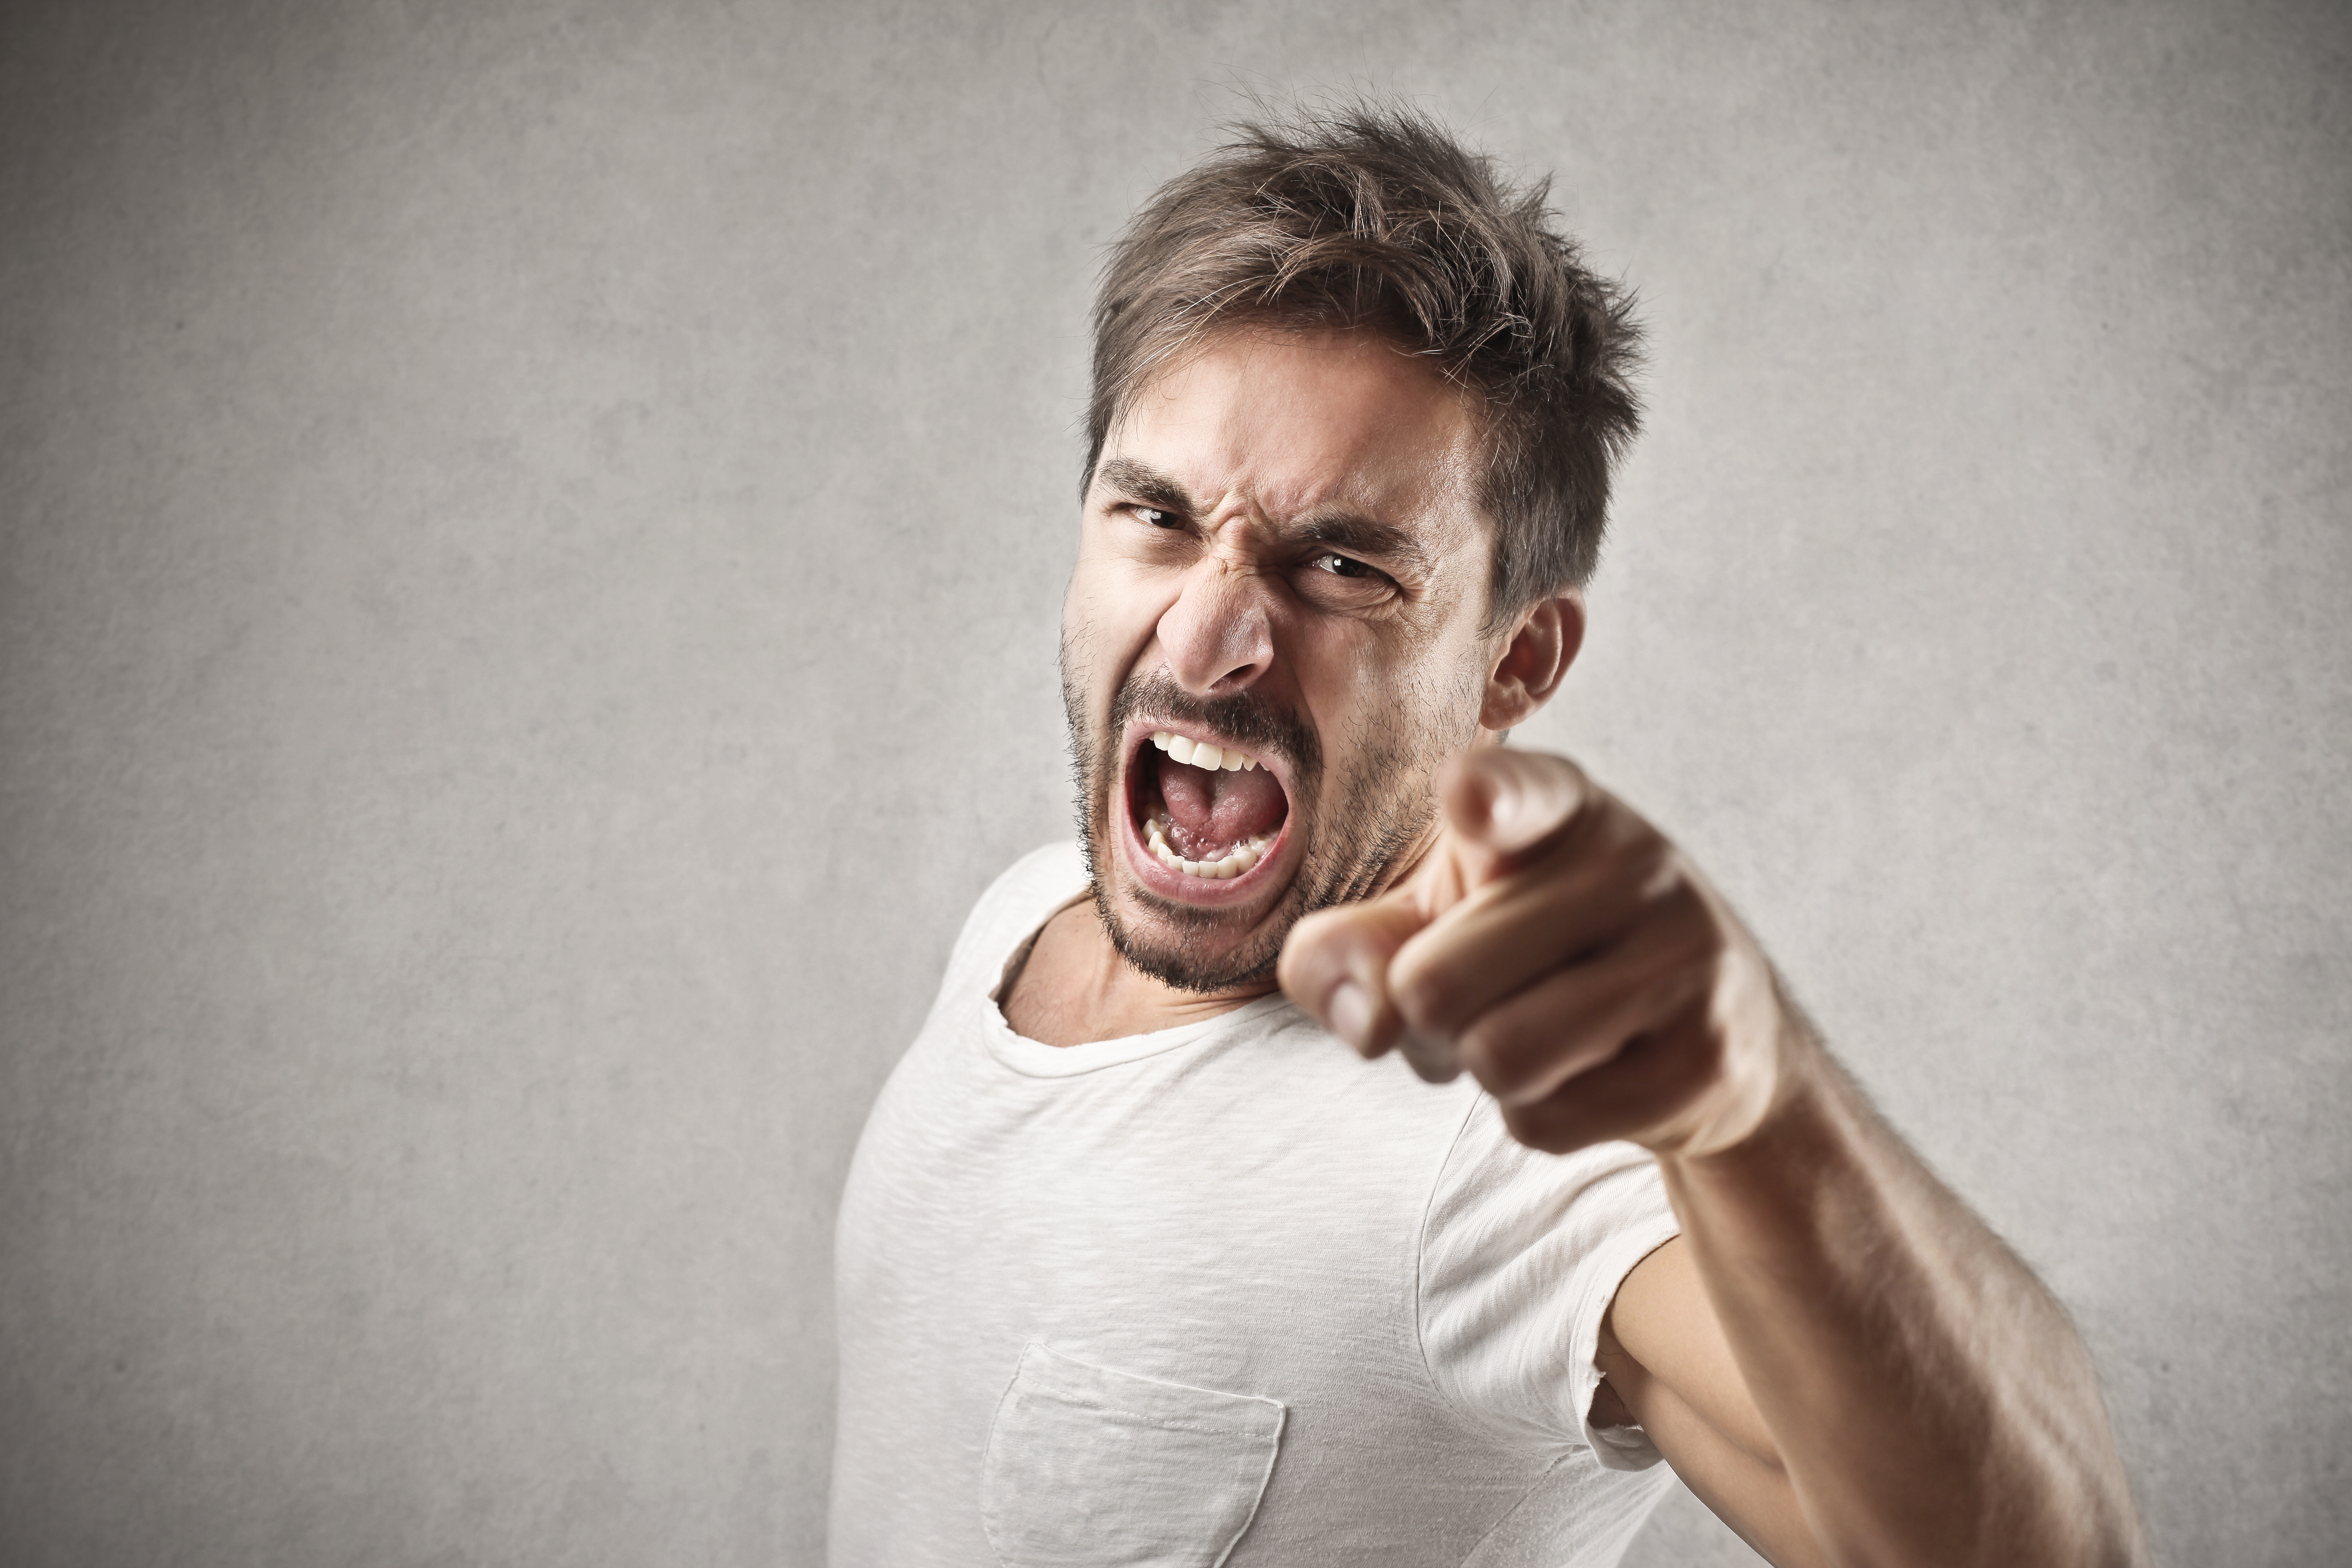 An angry man | Source: Shutterstock